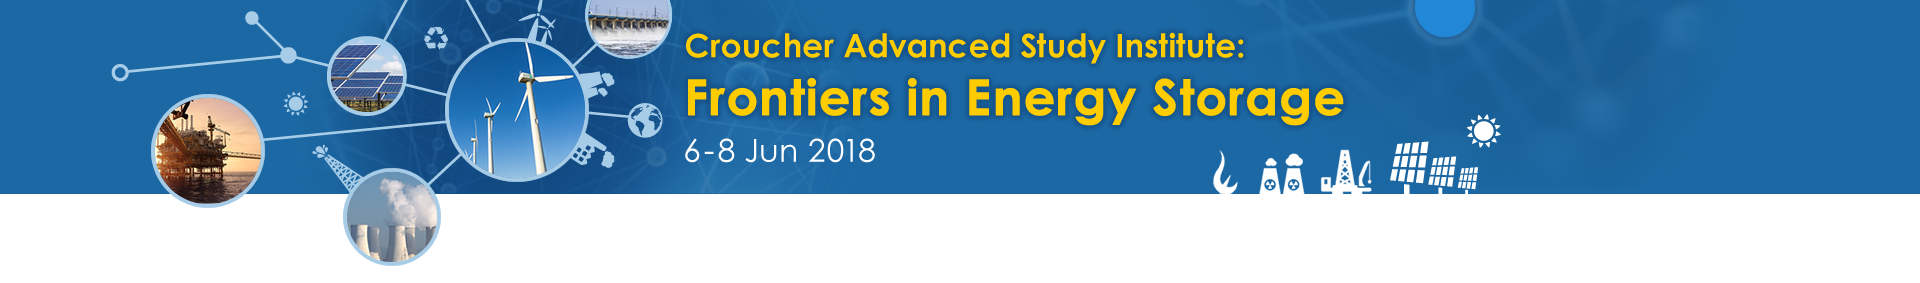 Croucher Advanced Study Institute: Frontiers in Energy Storage